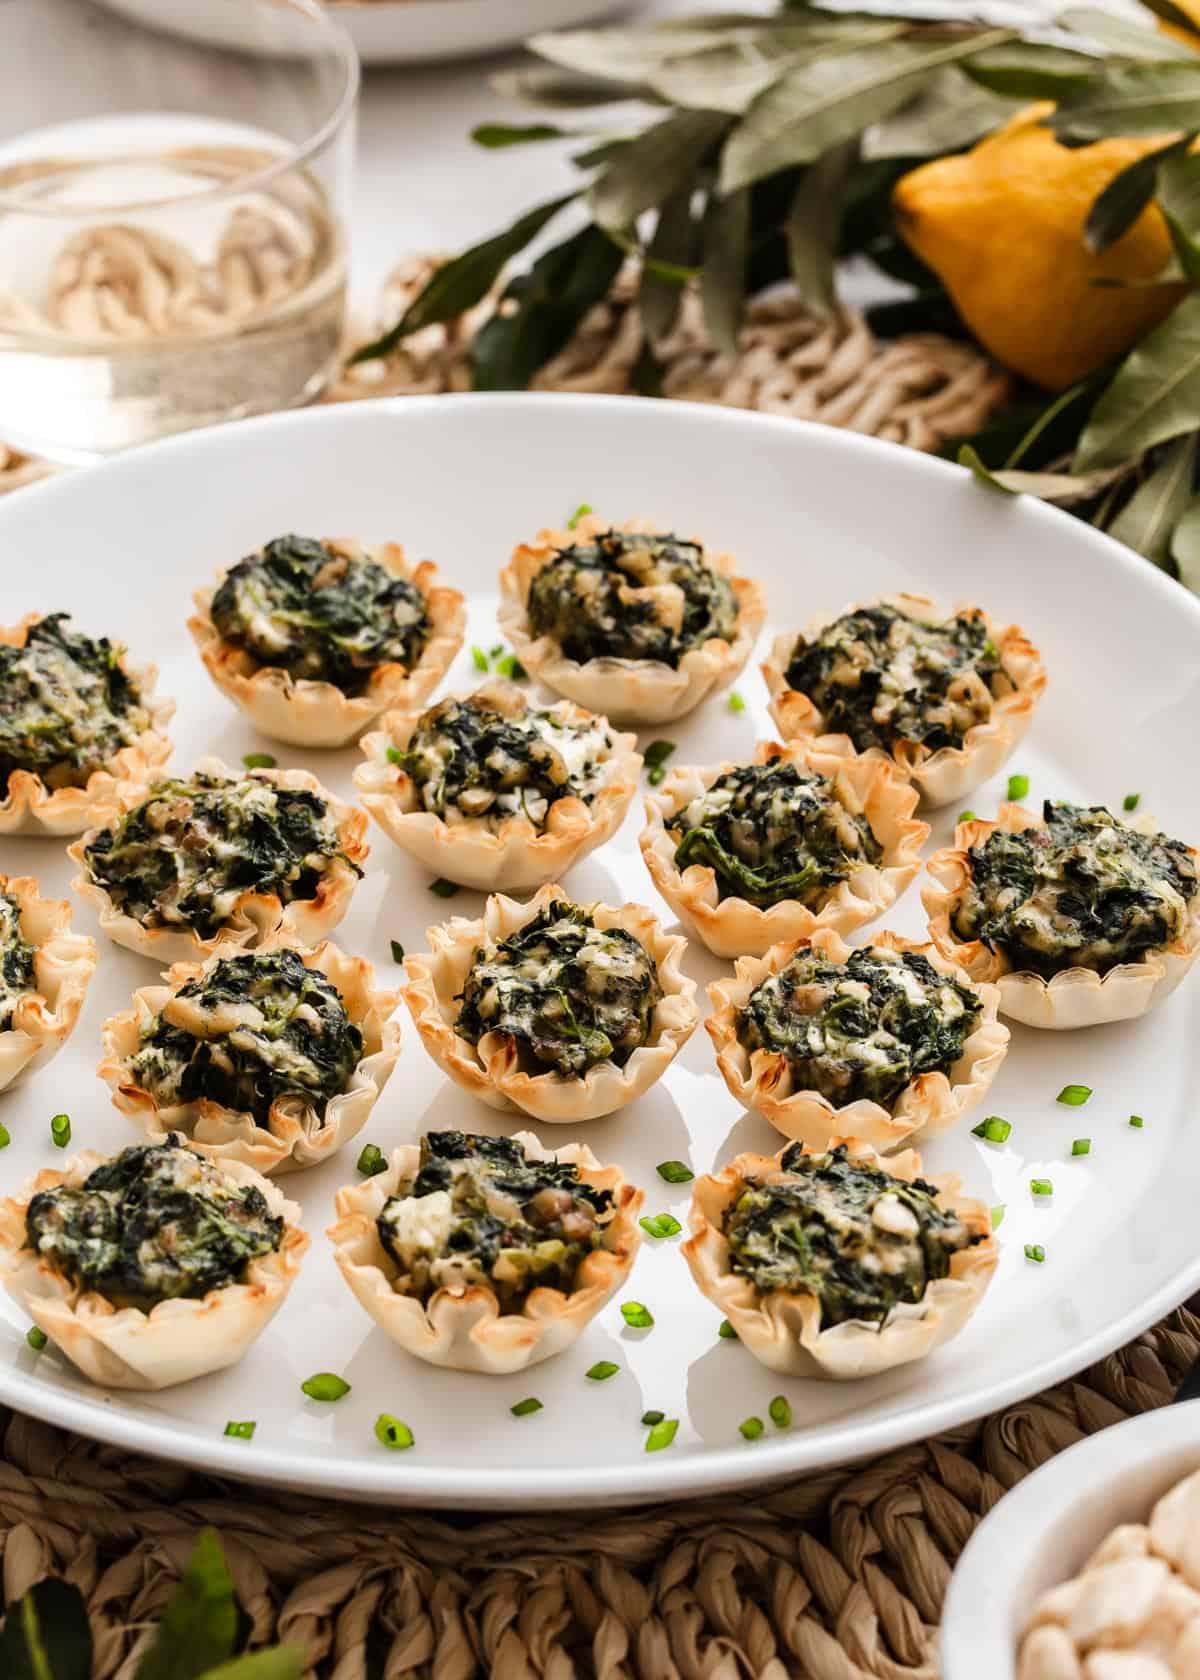 Mini phyllo shells filled with spinach spanakopita mix, served on white platter.